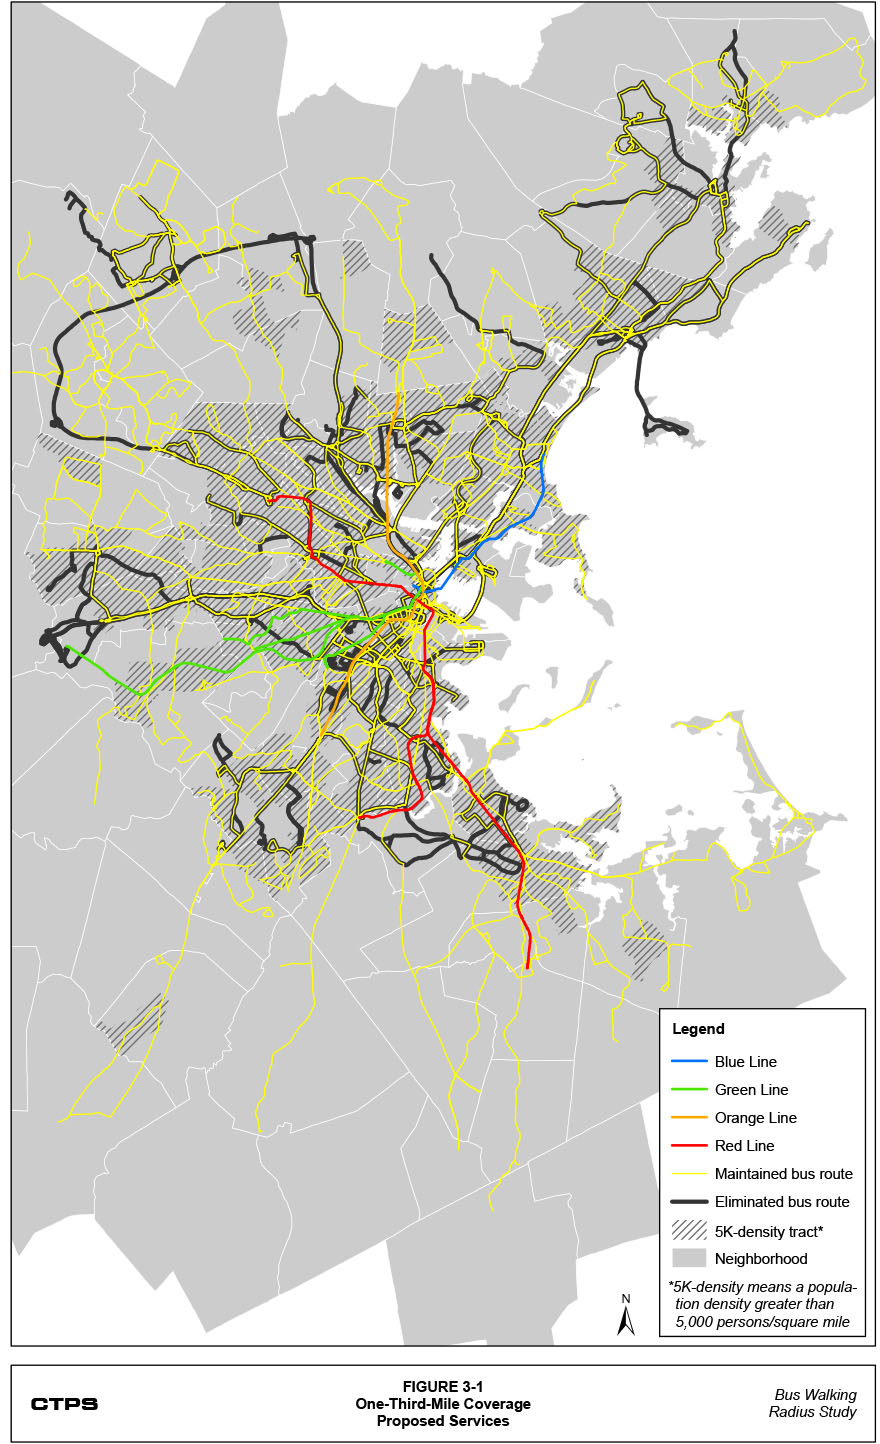 Figure 3-1: One-Third-Mile Coverage Proposed Services. This is a map that shows the transit routes that are proposed for maintenance and elimination in the service plan for the one-third-mile coverage threshold. The map also shows the location of census tracts with a population density greater than 5,000 persons per square mile.

